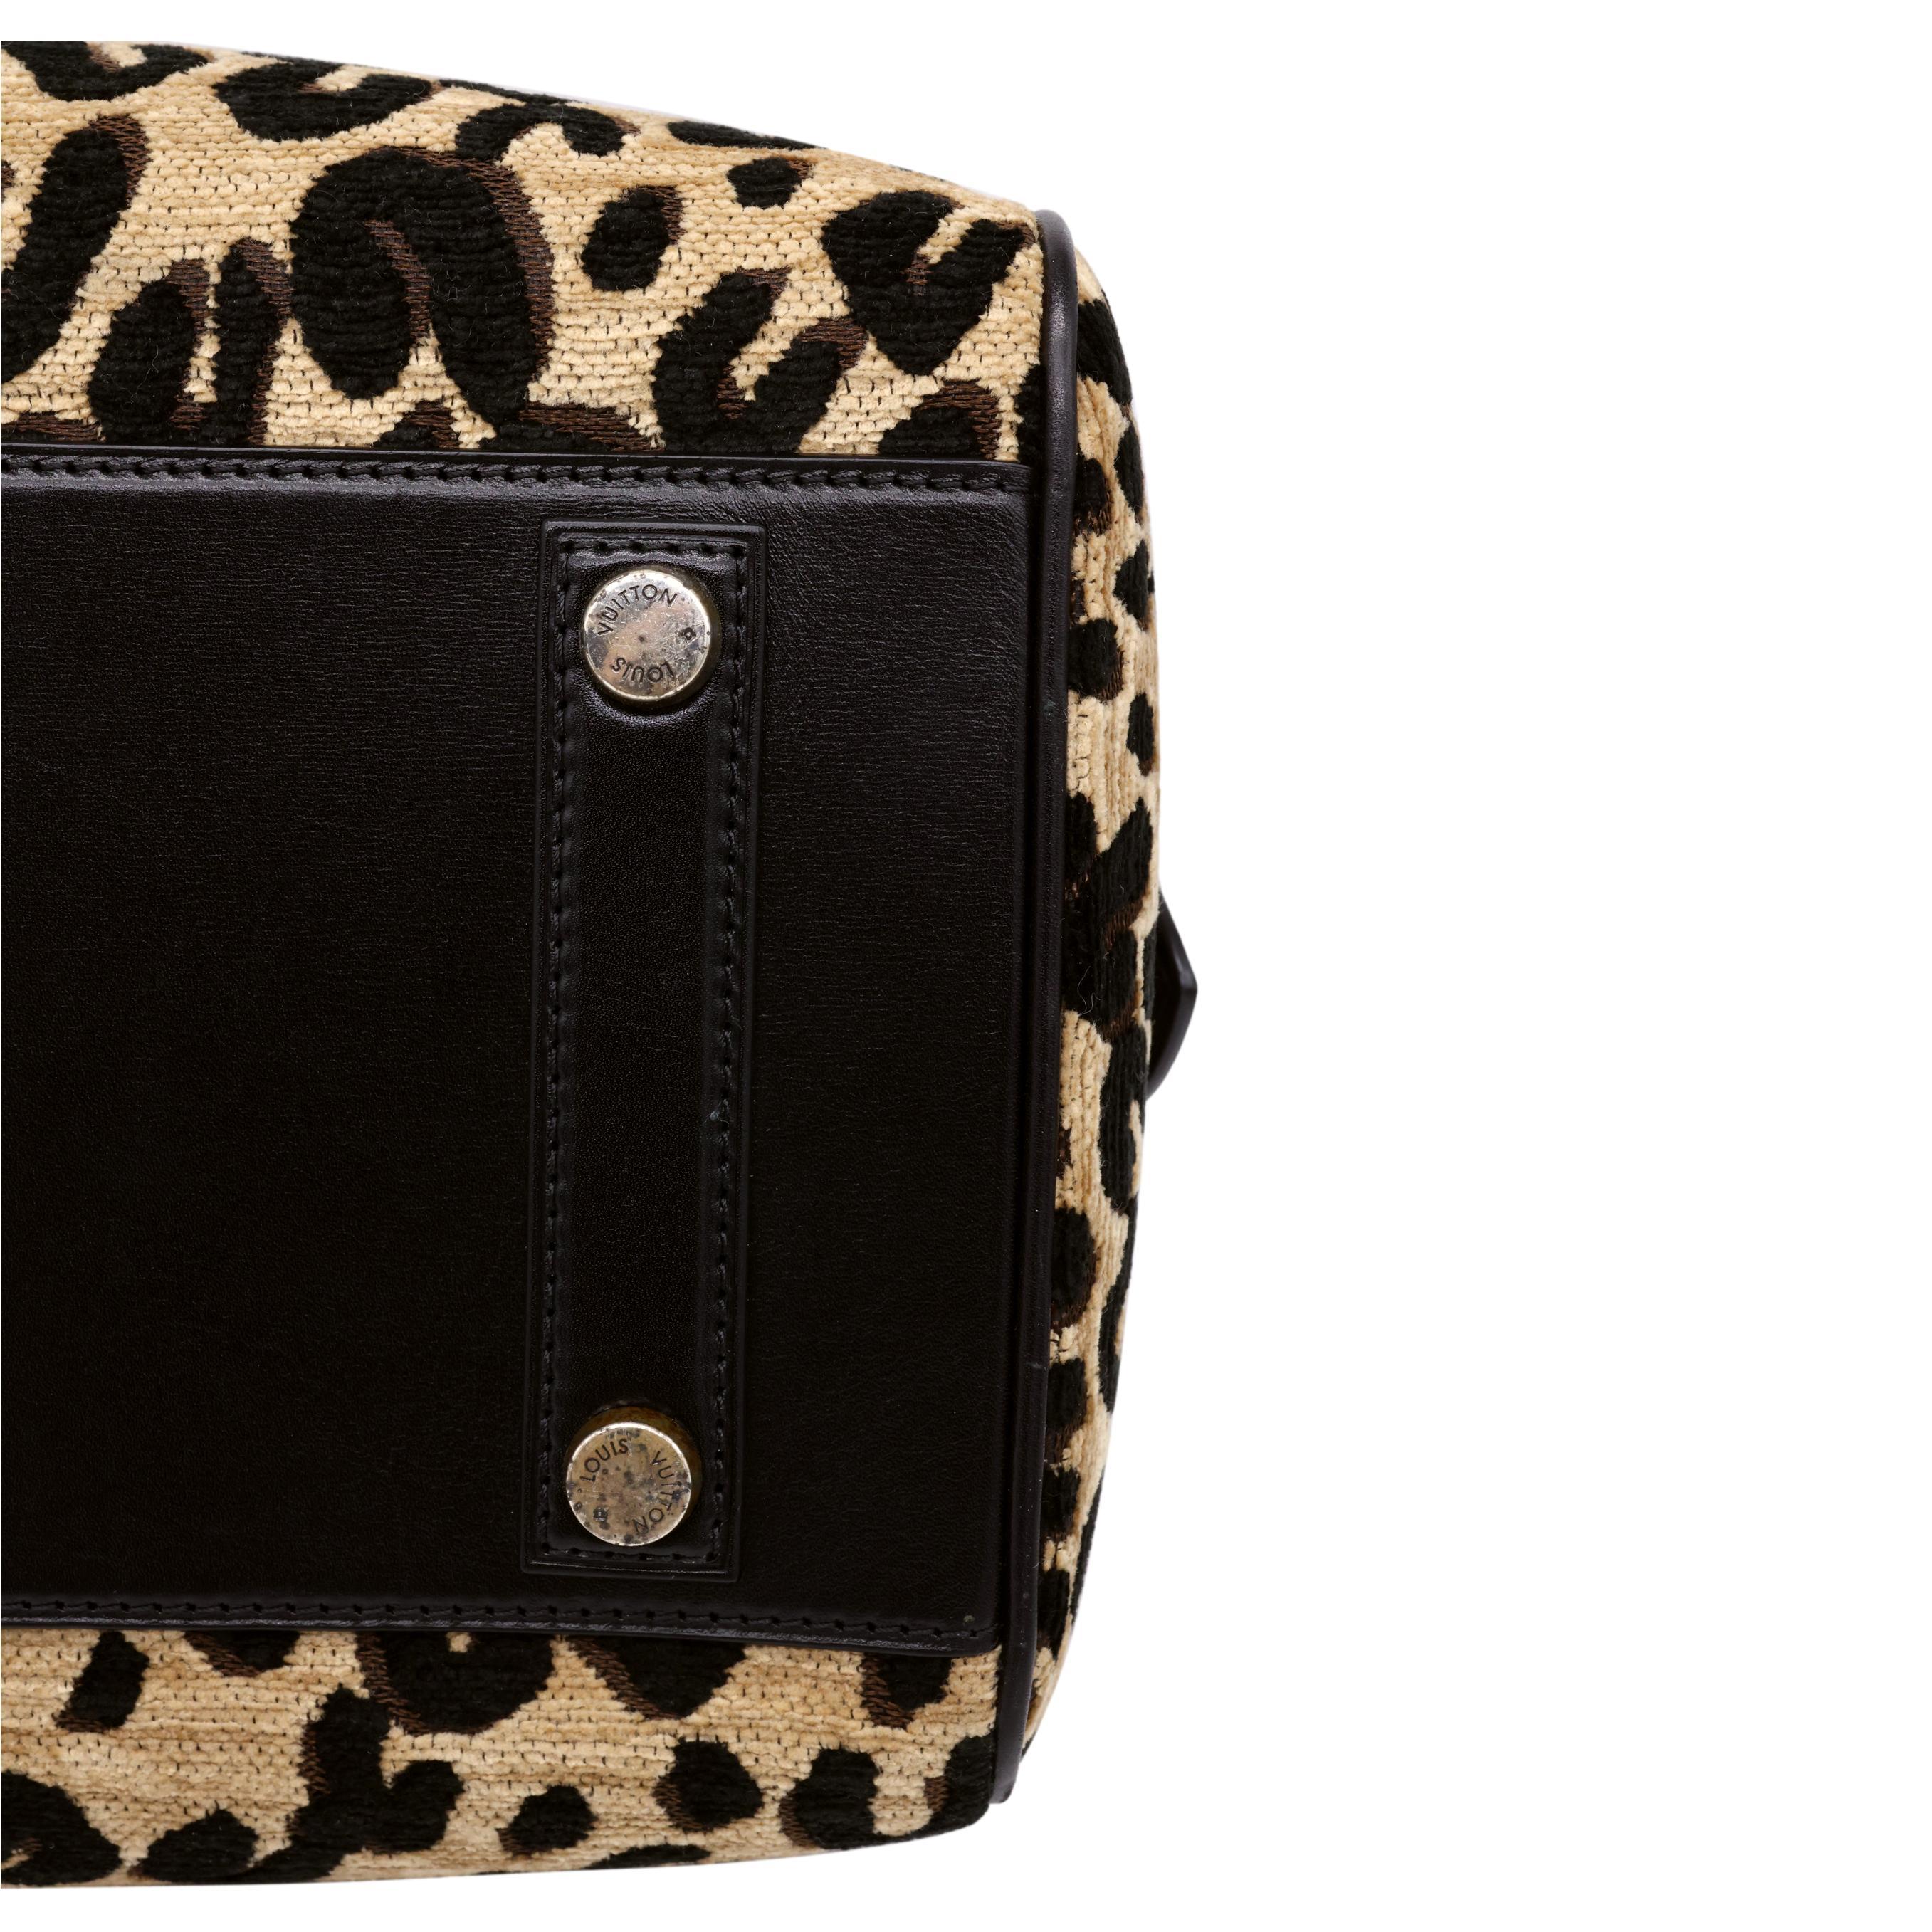 Limited Edition Louis Vuitton x Stephen Sprouse Leopard Speedy Bag, 2012. 3